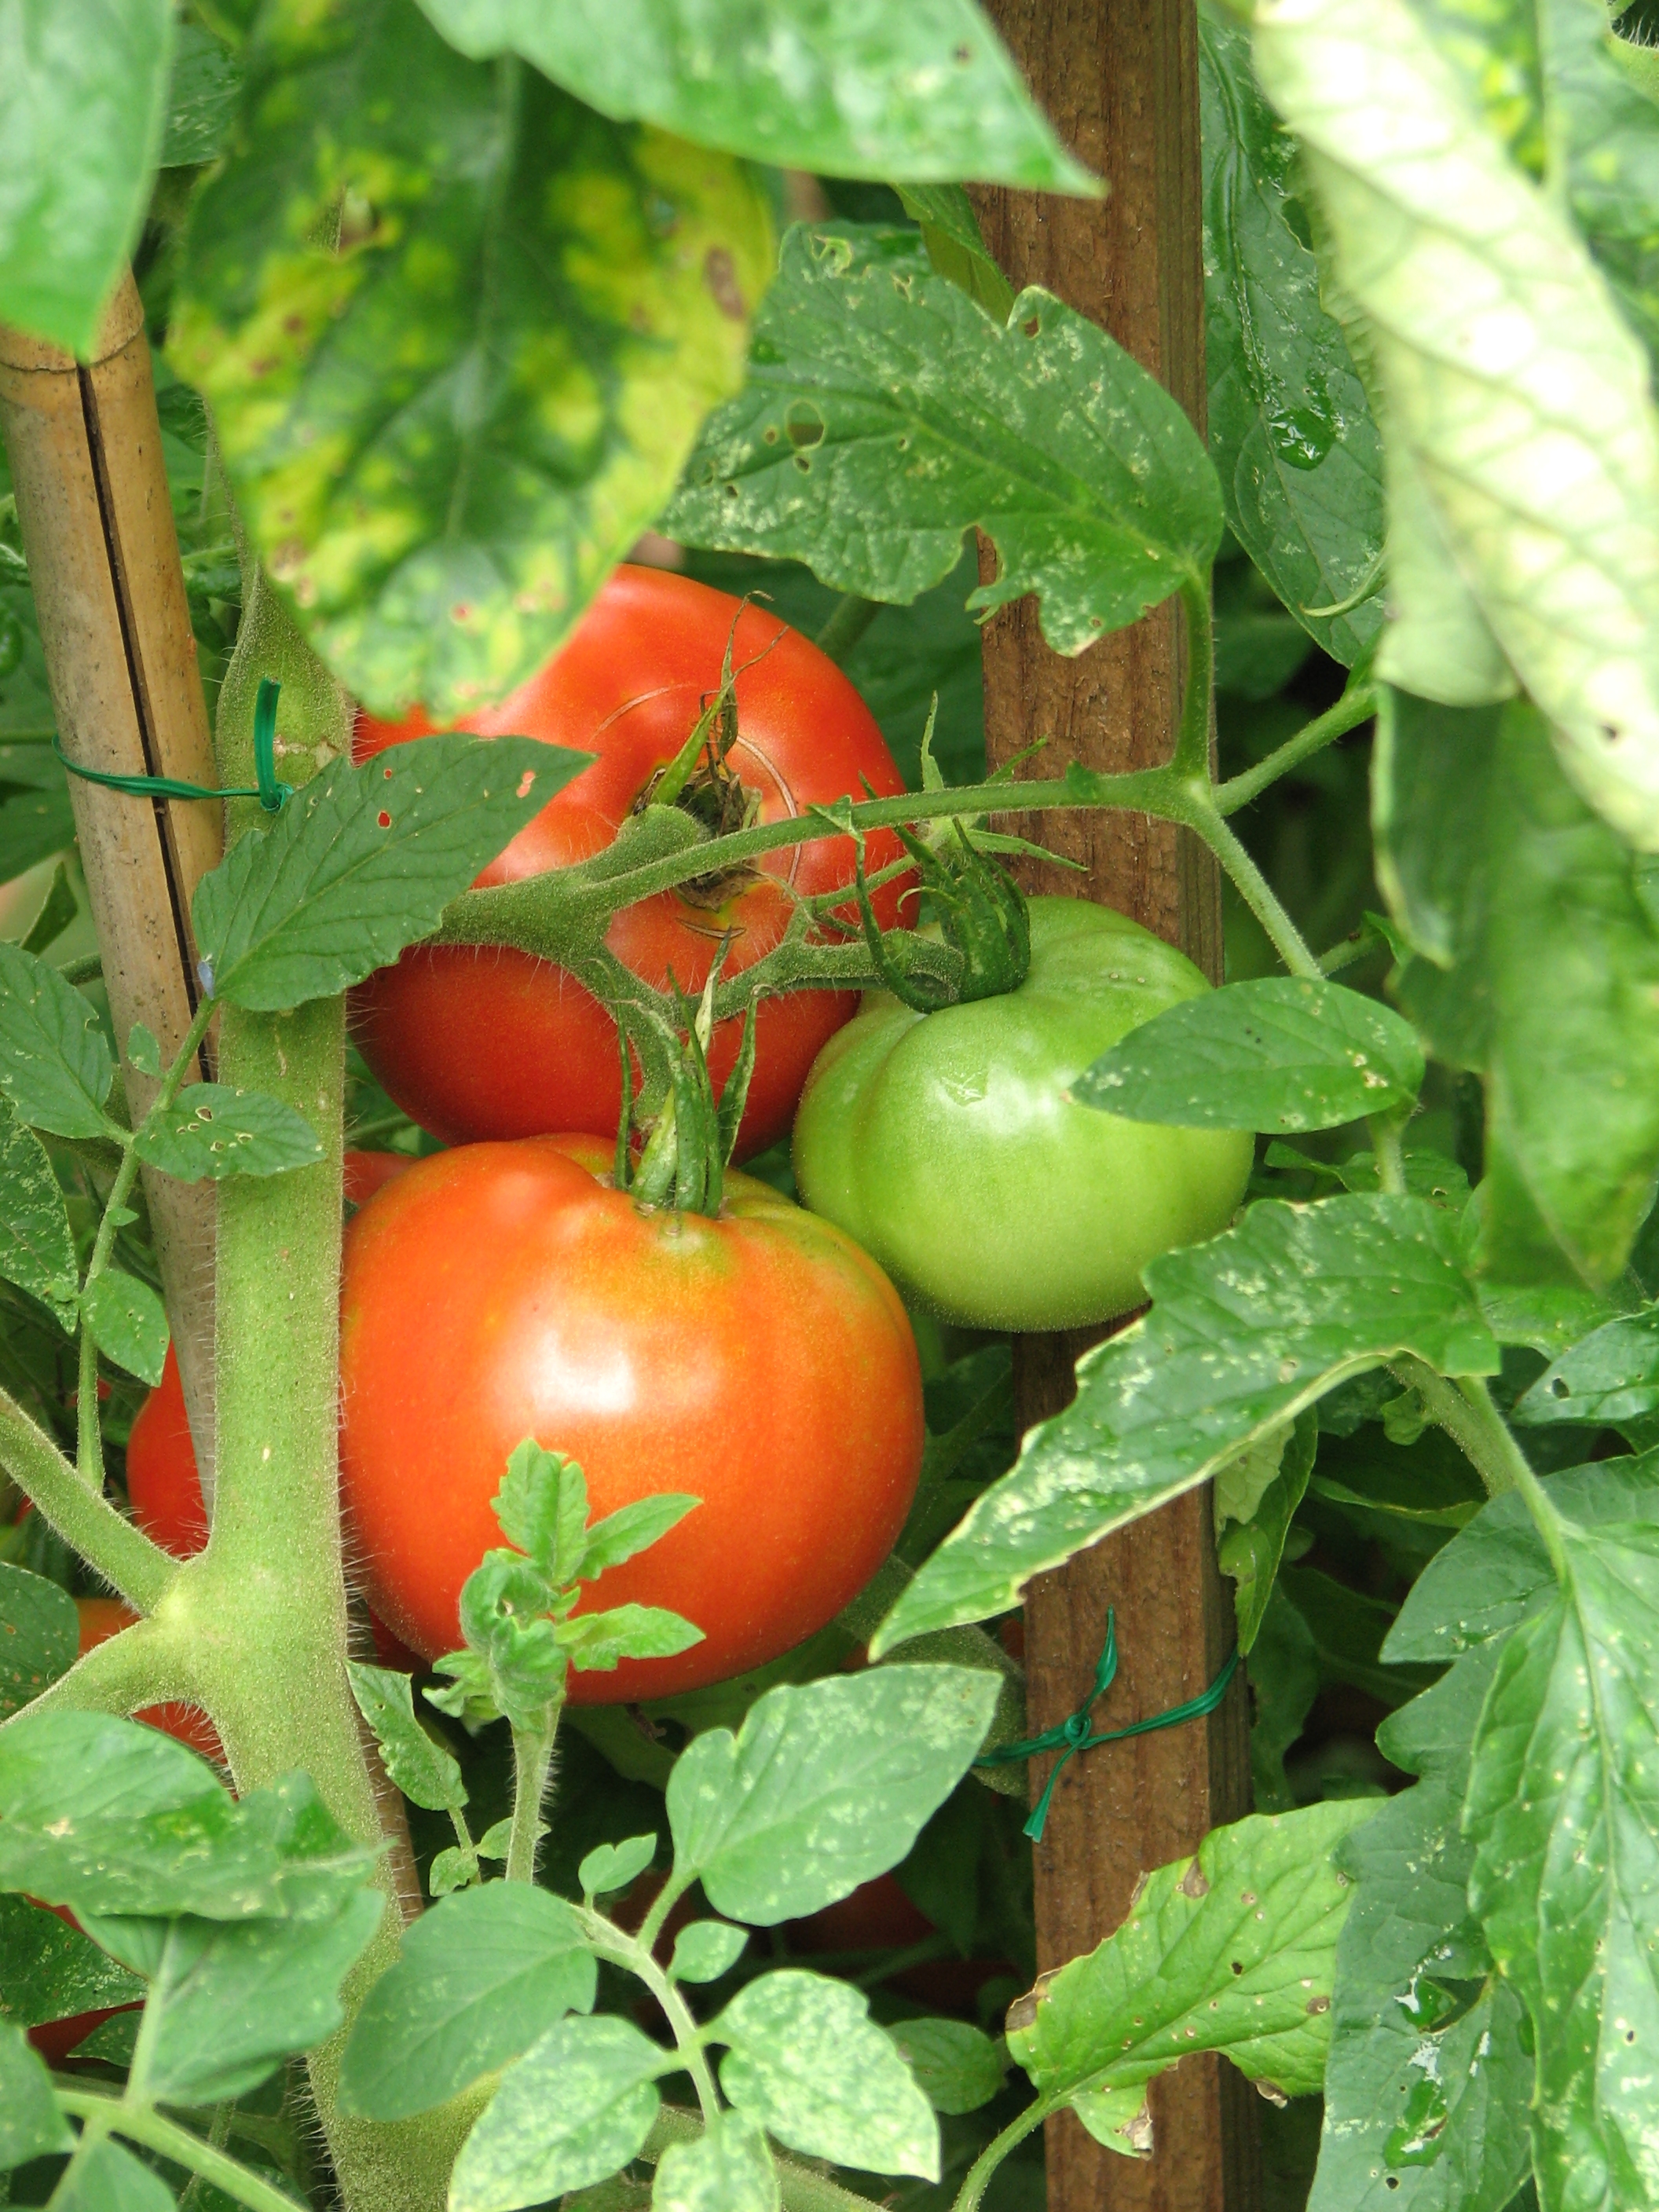 Tomatoes in a garden